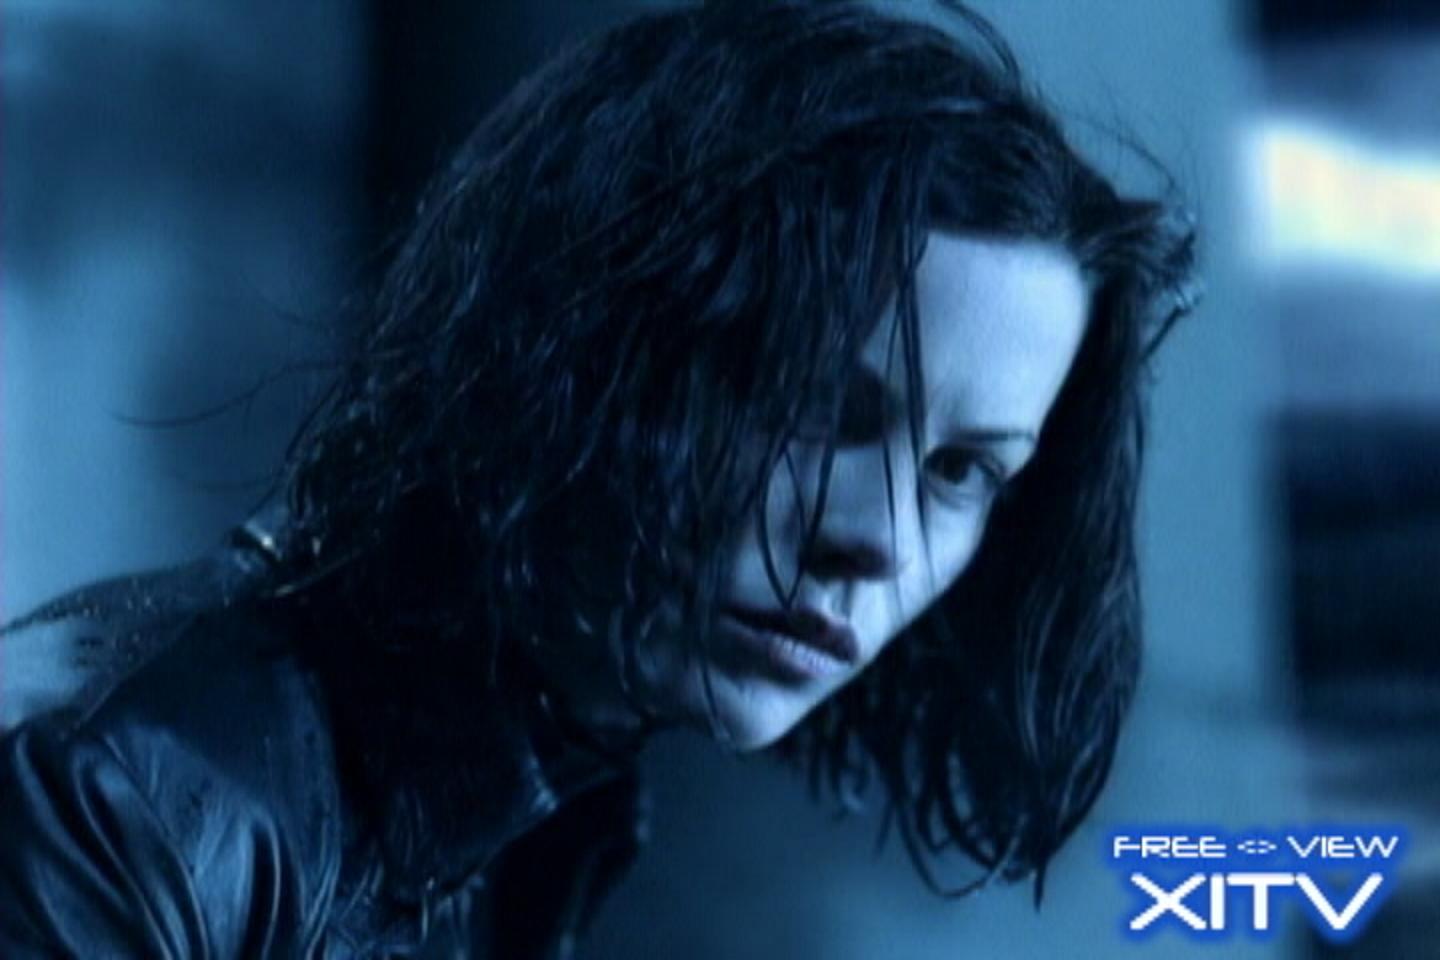 Free Movies Show List #2 Featuring UNDERWORLD Starring Kate Beckinsale! Watch Many More Great Films On XITV FREE <> VIEW